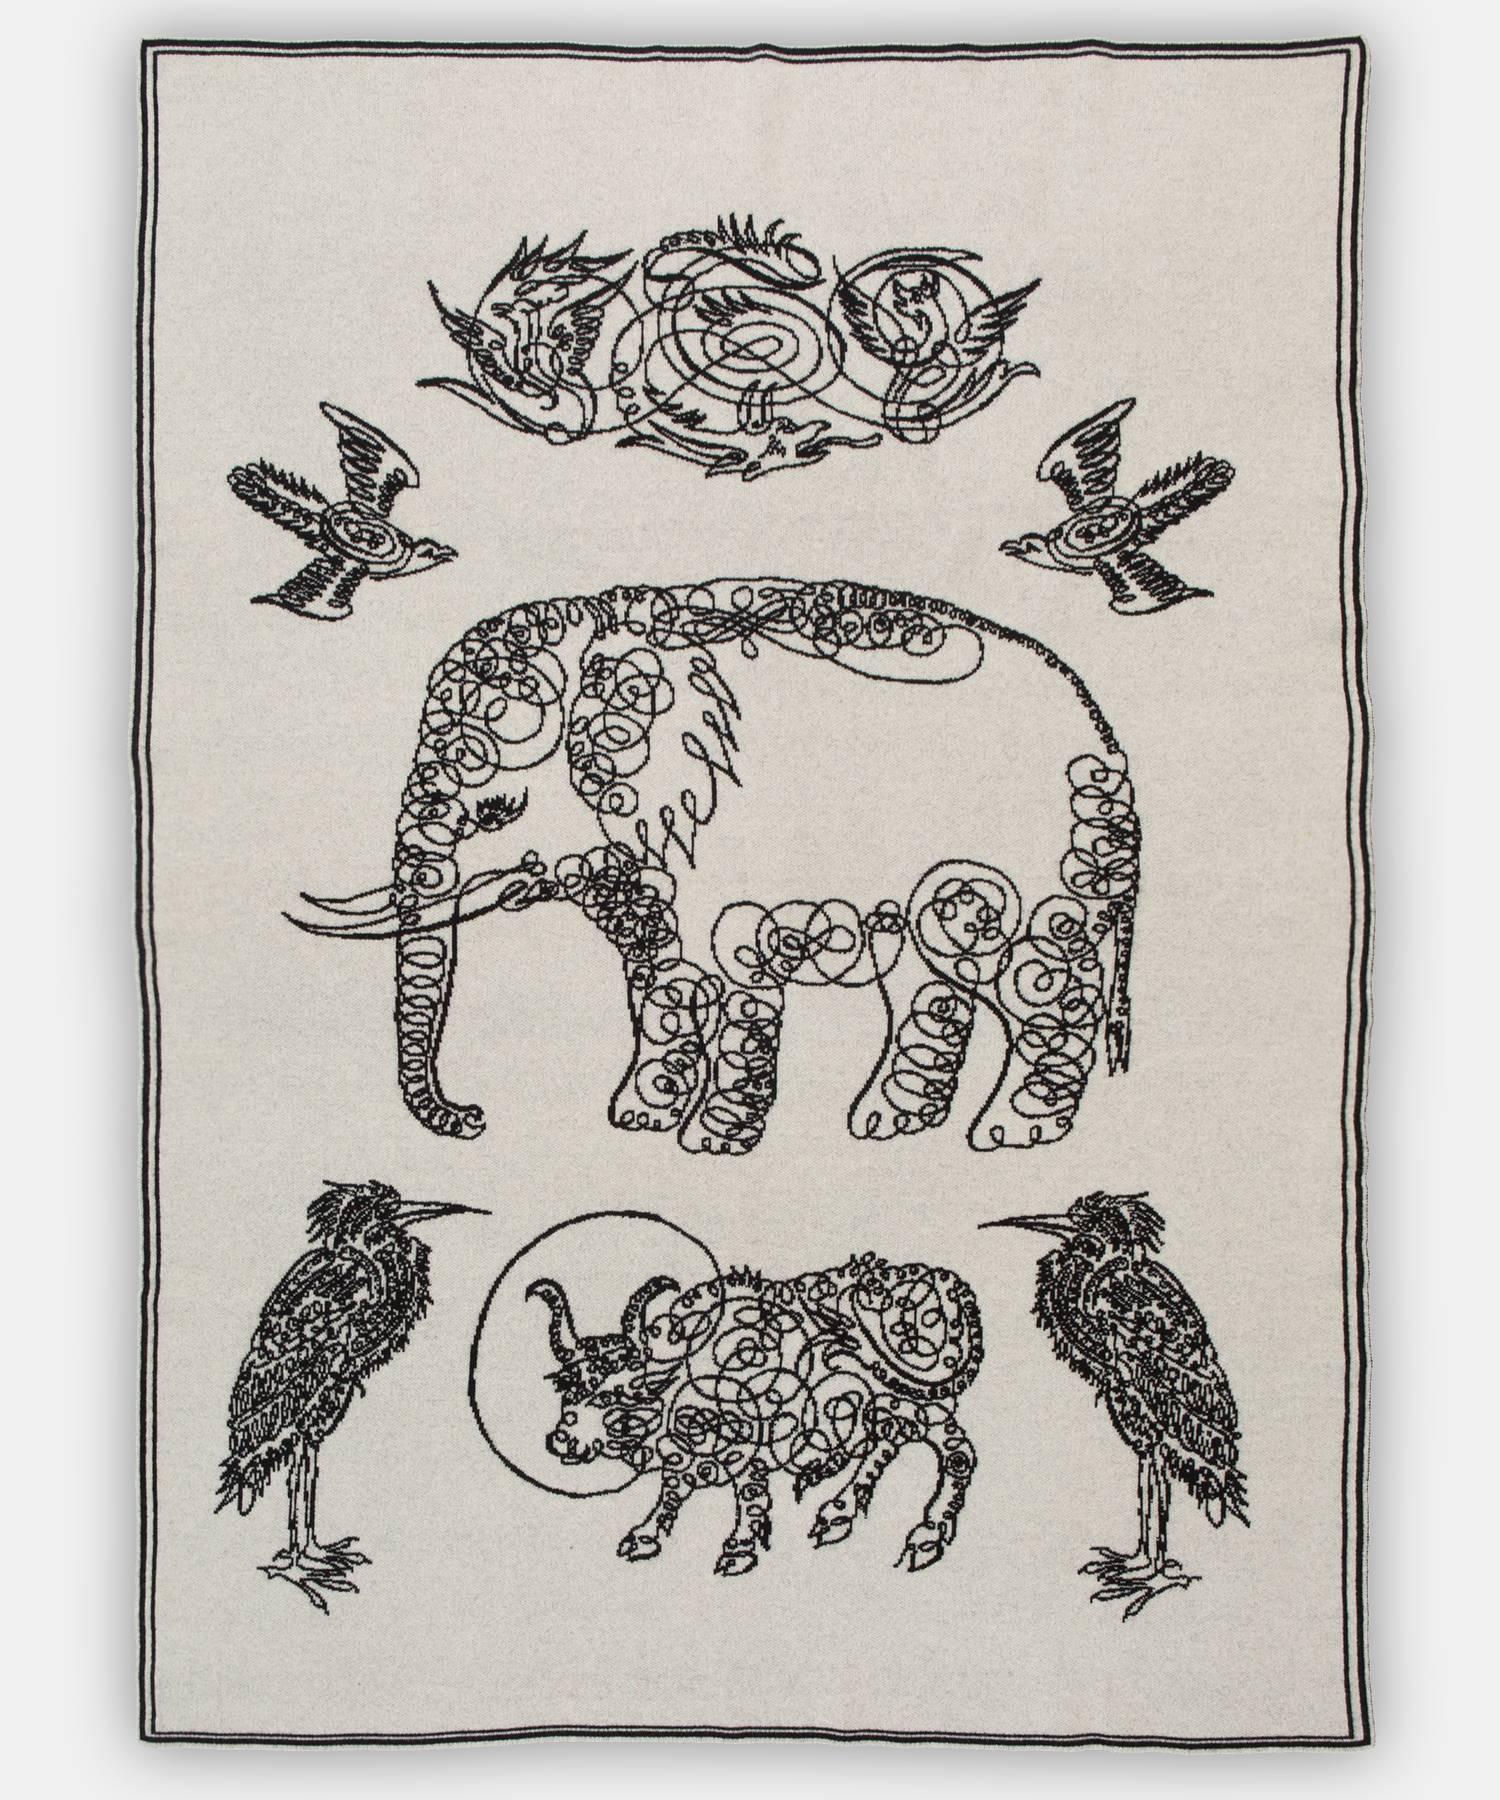 Elephant and friends blanket by Saved, New York.

Inspired by folkloric calligraphy drawing. Woven directly into the rich jacquard knit, these warm friends represent animals revered throughout the ages. Available in King and Queen sizes, please